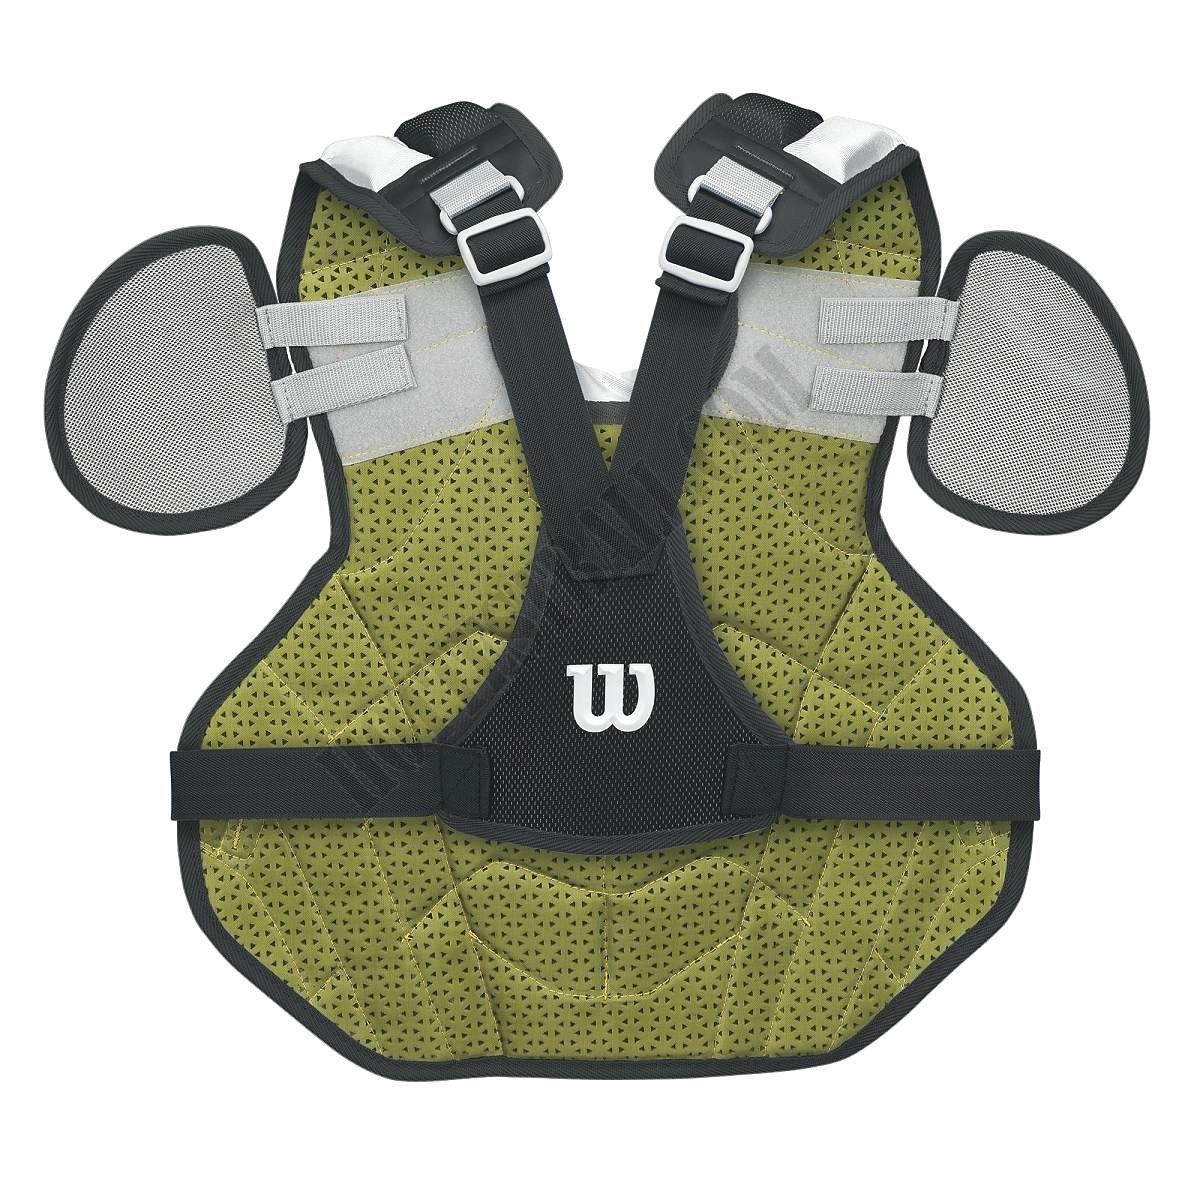 Pro Stock Chest Protector - Wilson Discount Store - -2